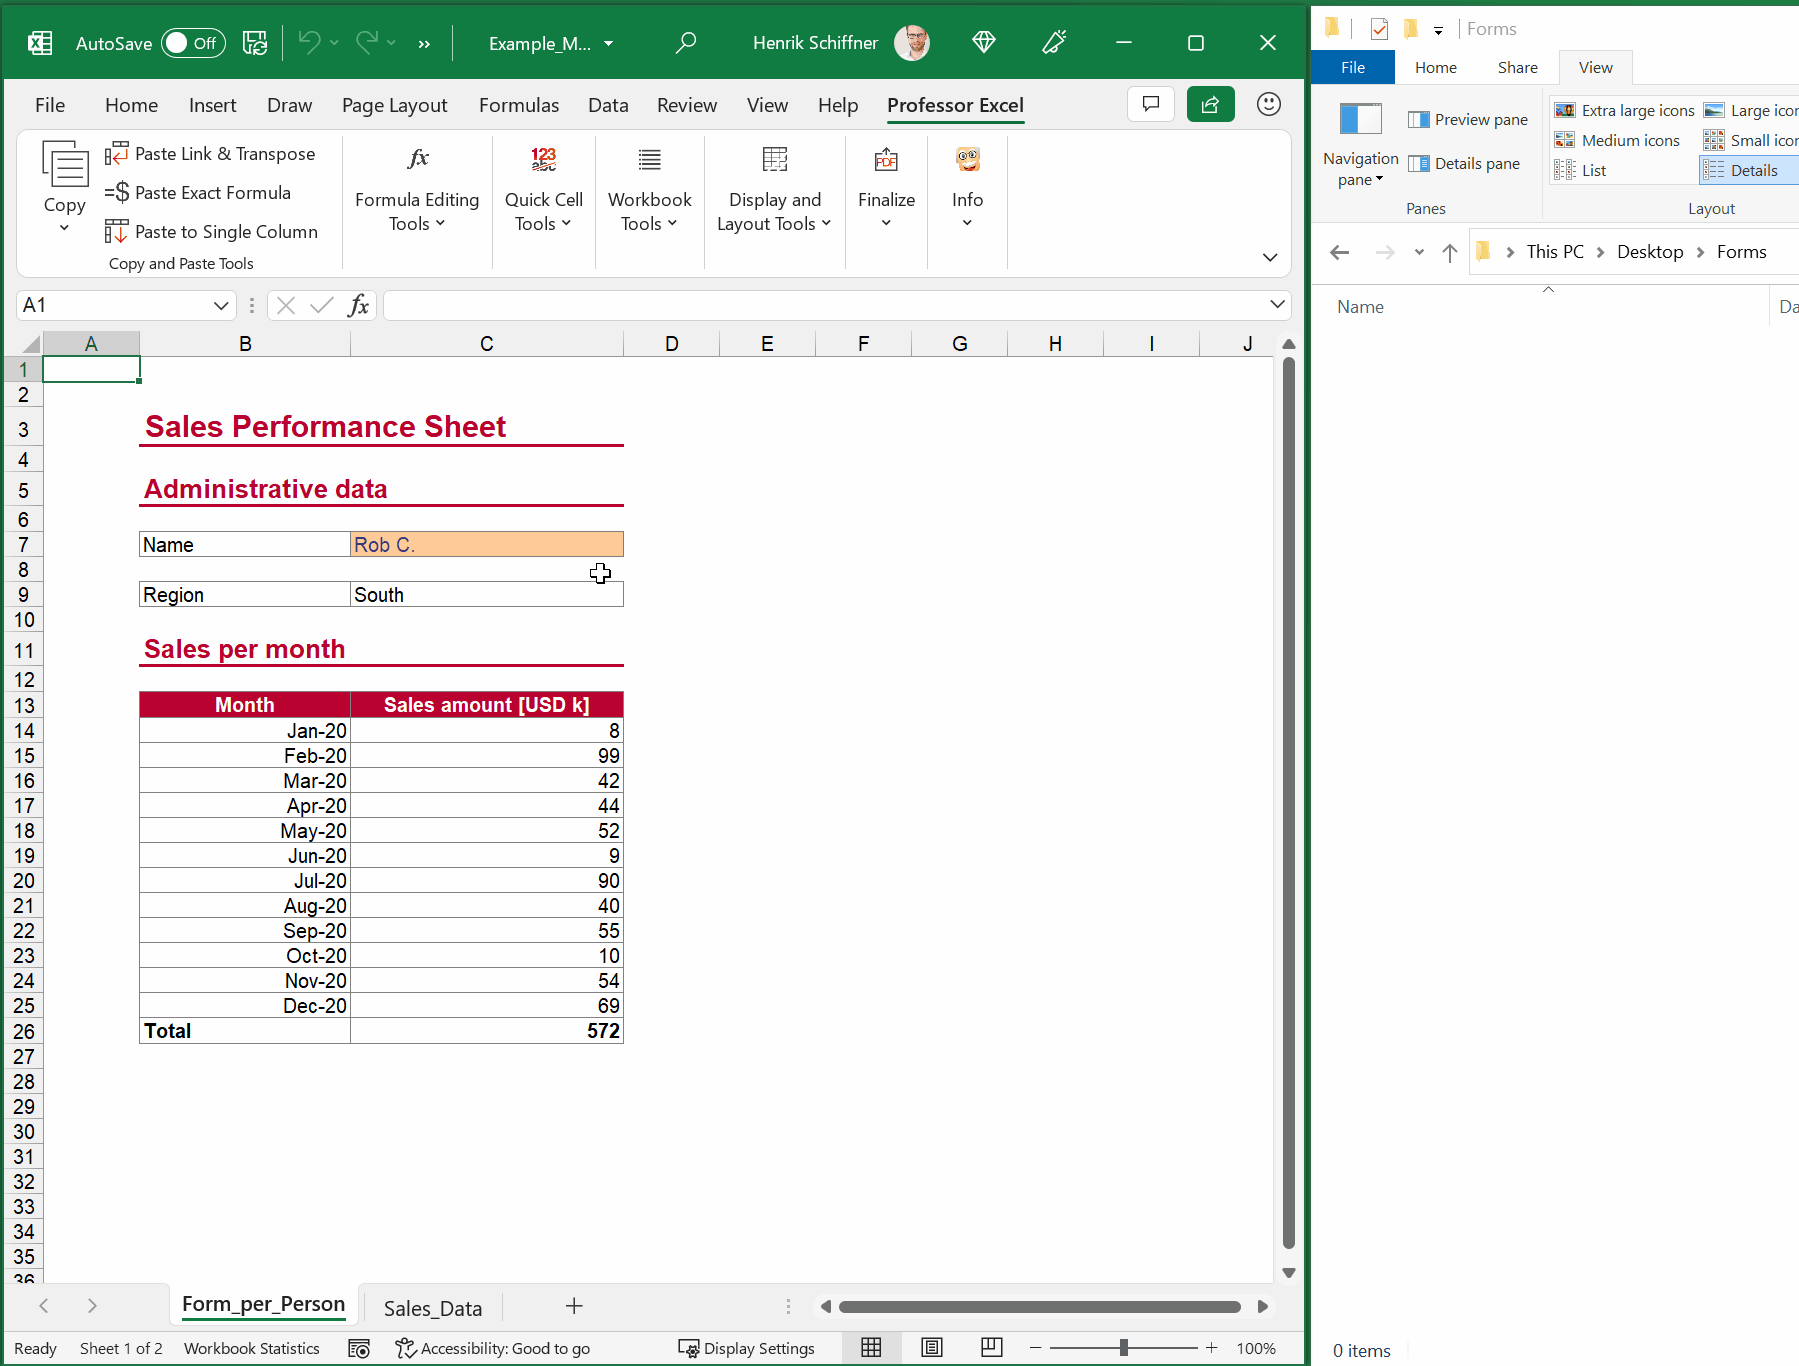 Mass export Excel sheet with the Excel add-in "Professor Excel Tools"